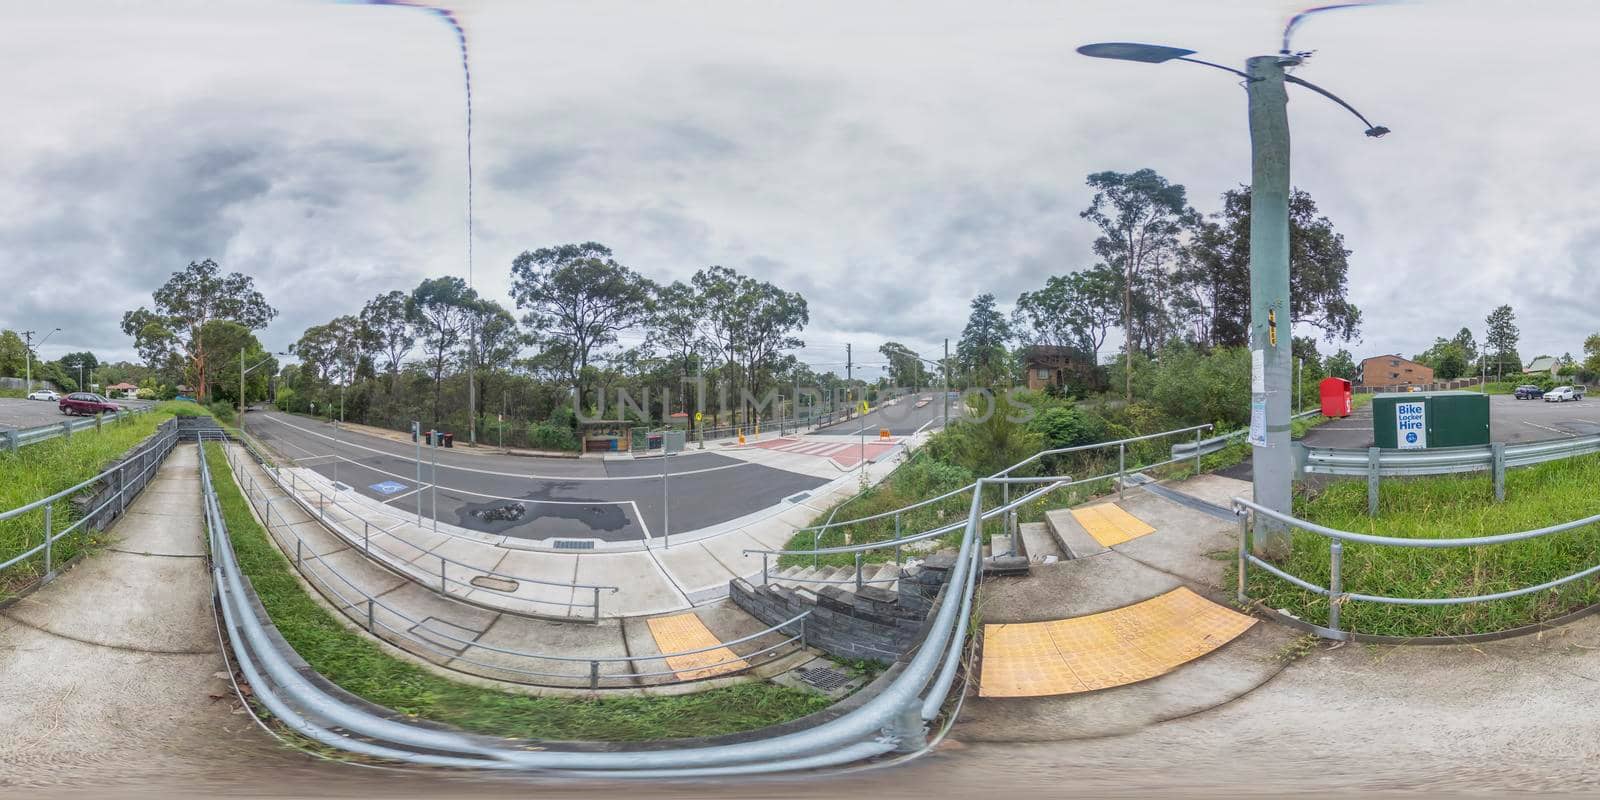 Spherical 360 panoramic photograph of Glenbrook Train Station in regional Australia by WittkePhotos